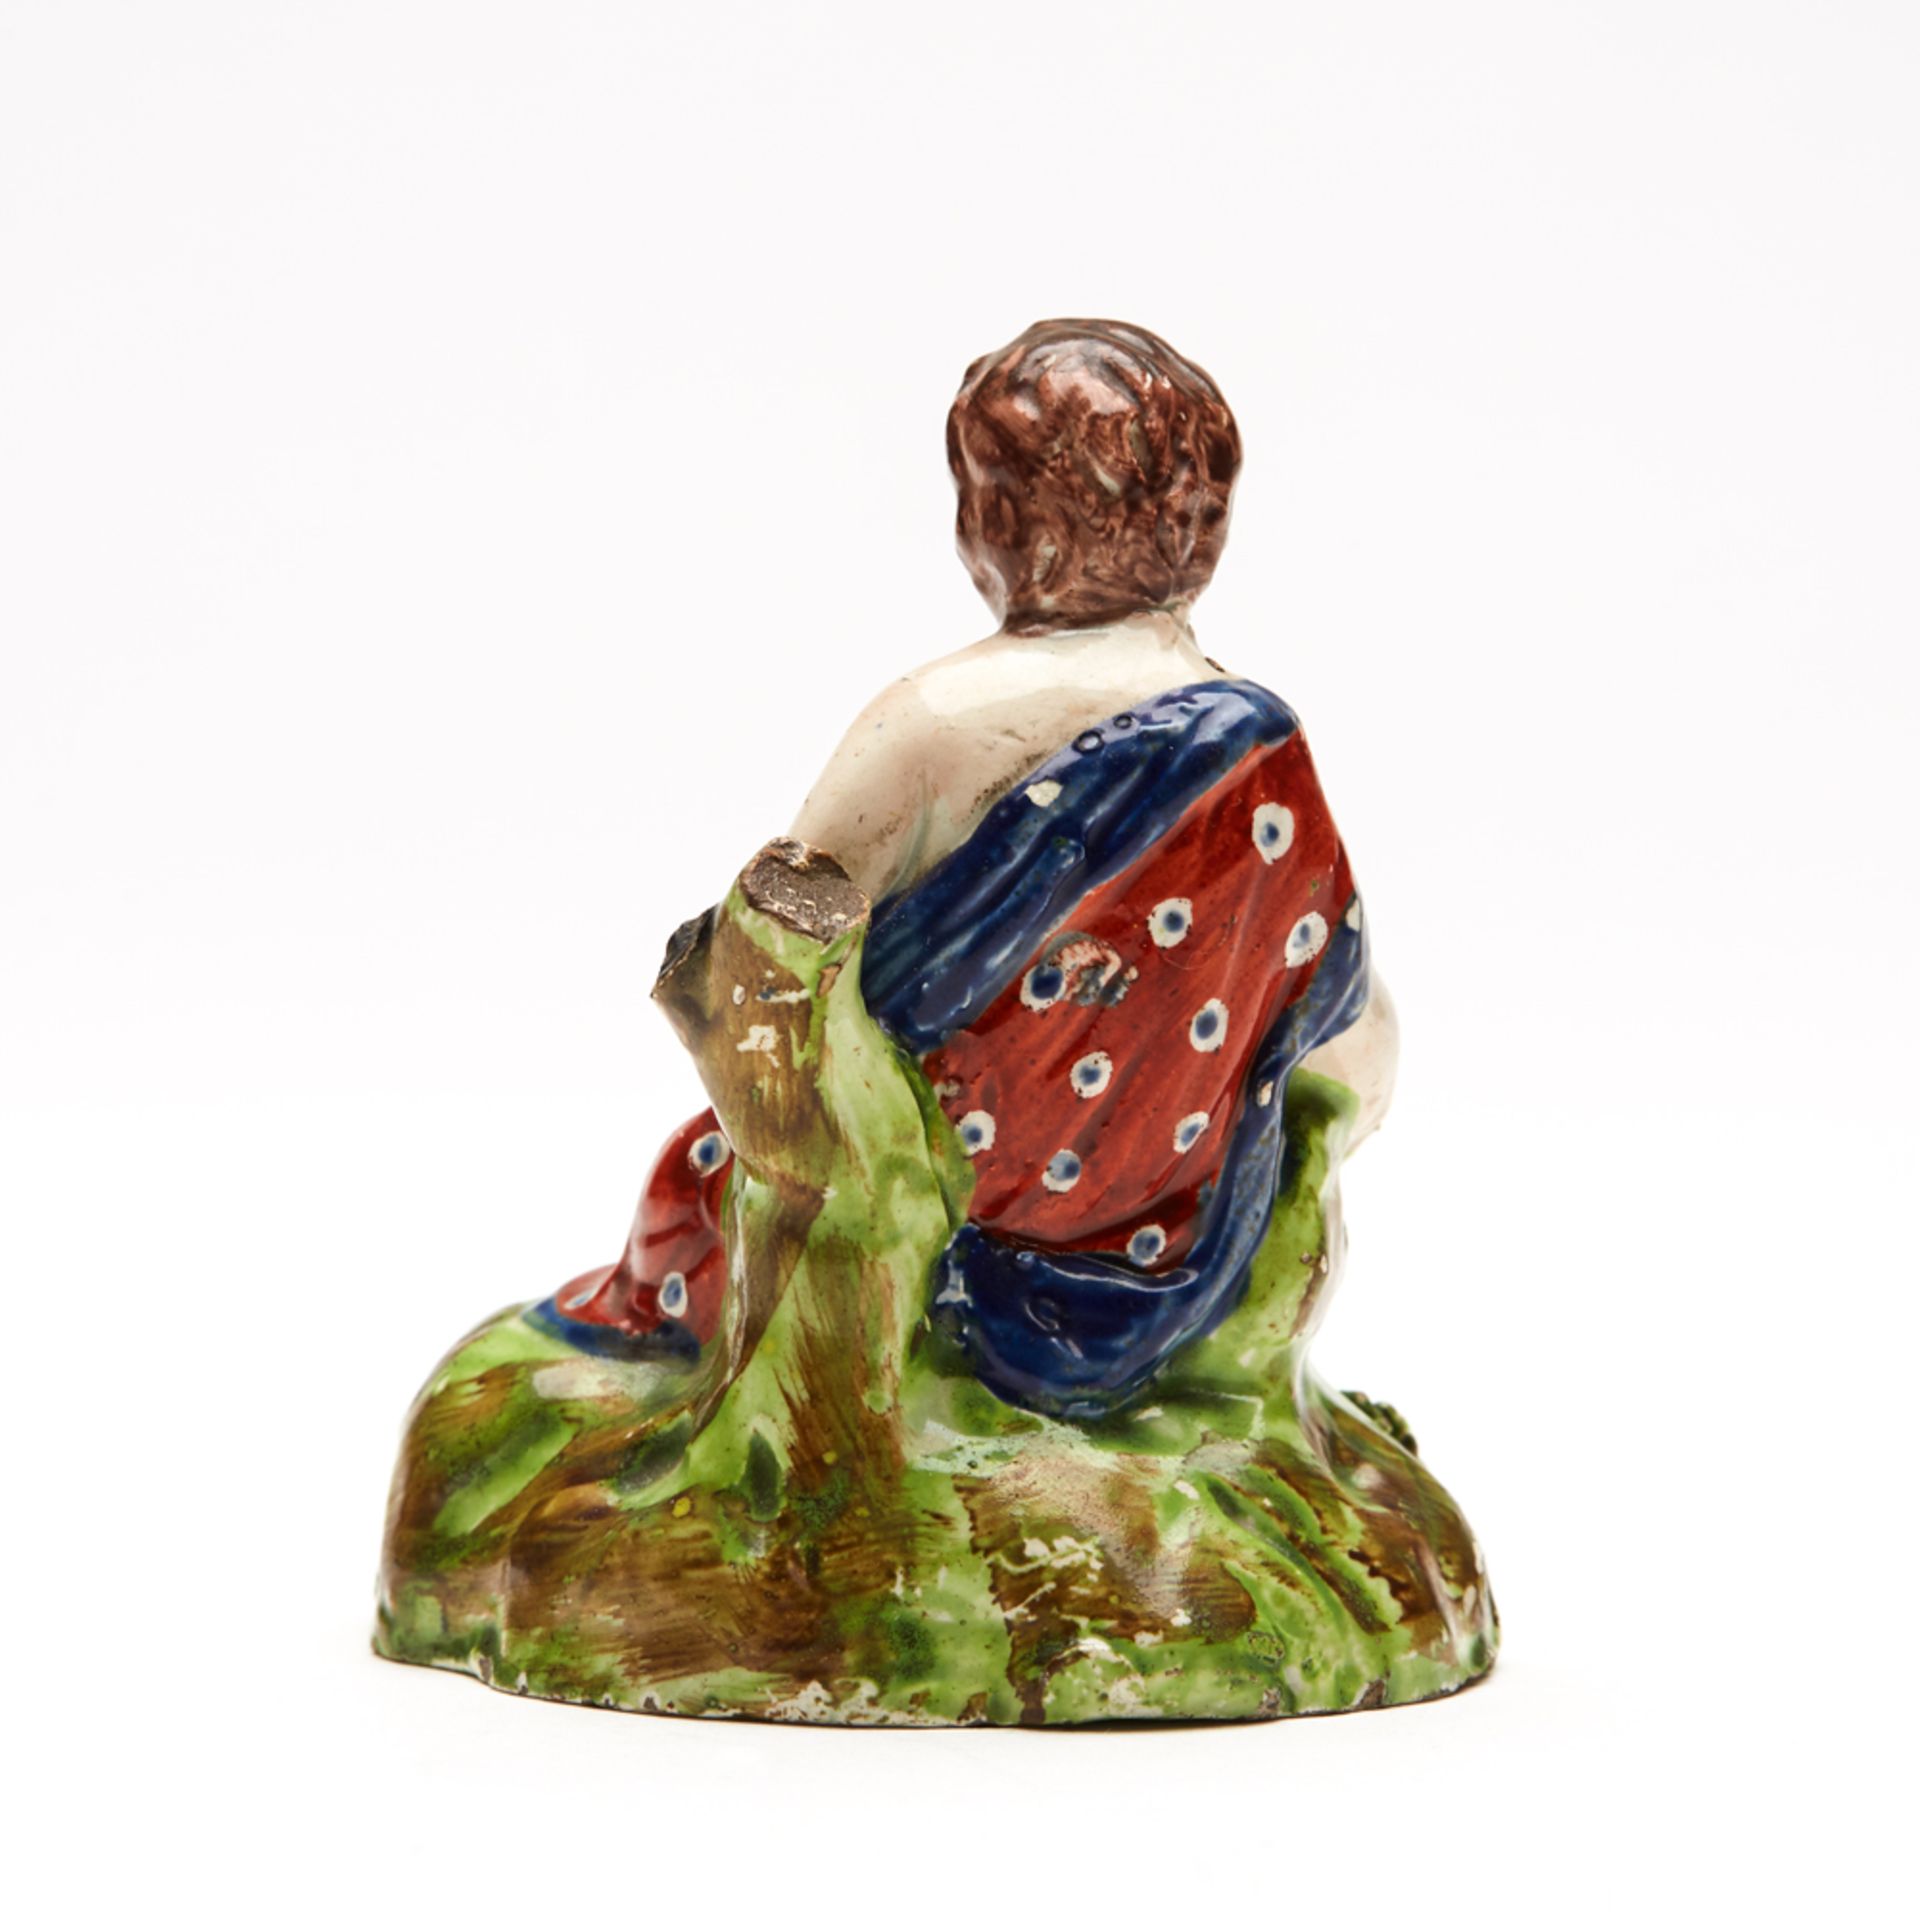 Antique Staffordshire Pearlware Seated Girl Figure C.1800 - Image 3 of 6